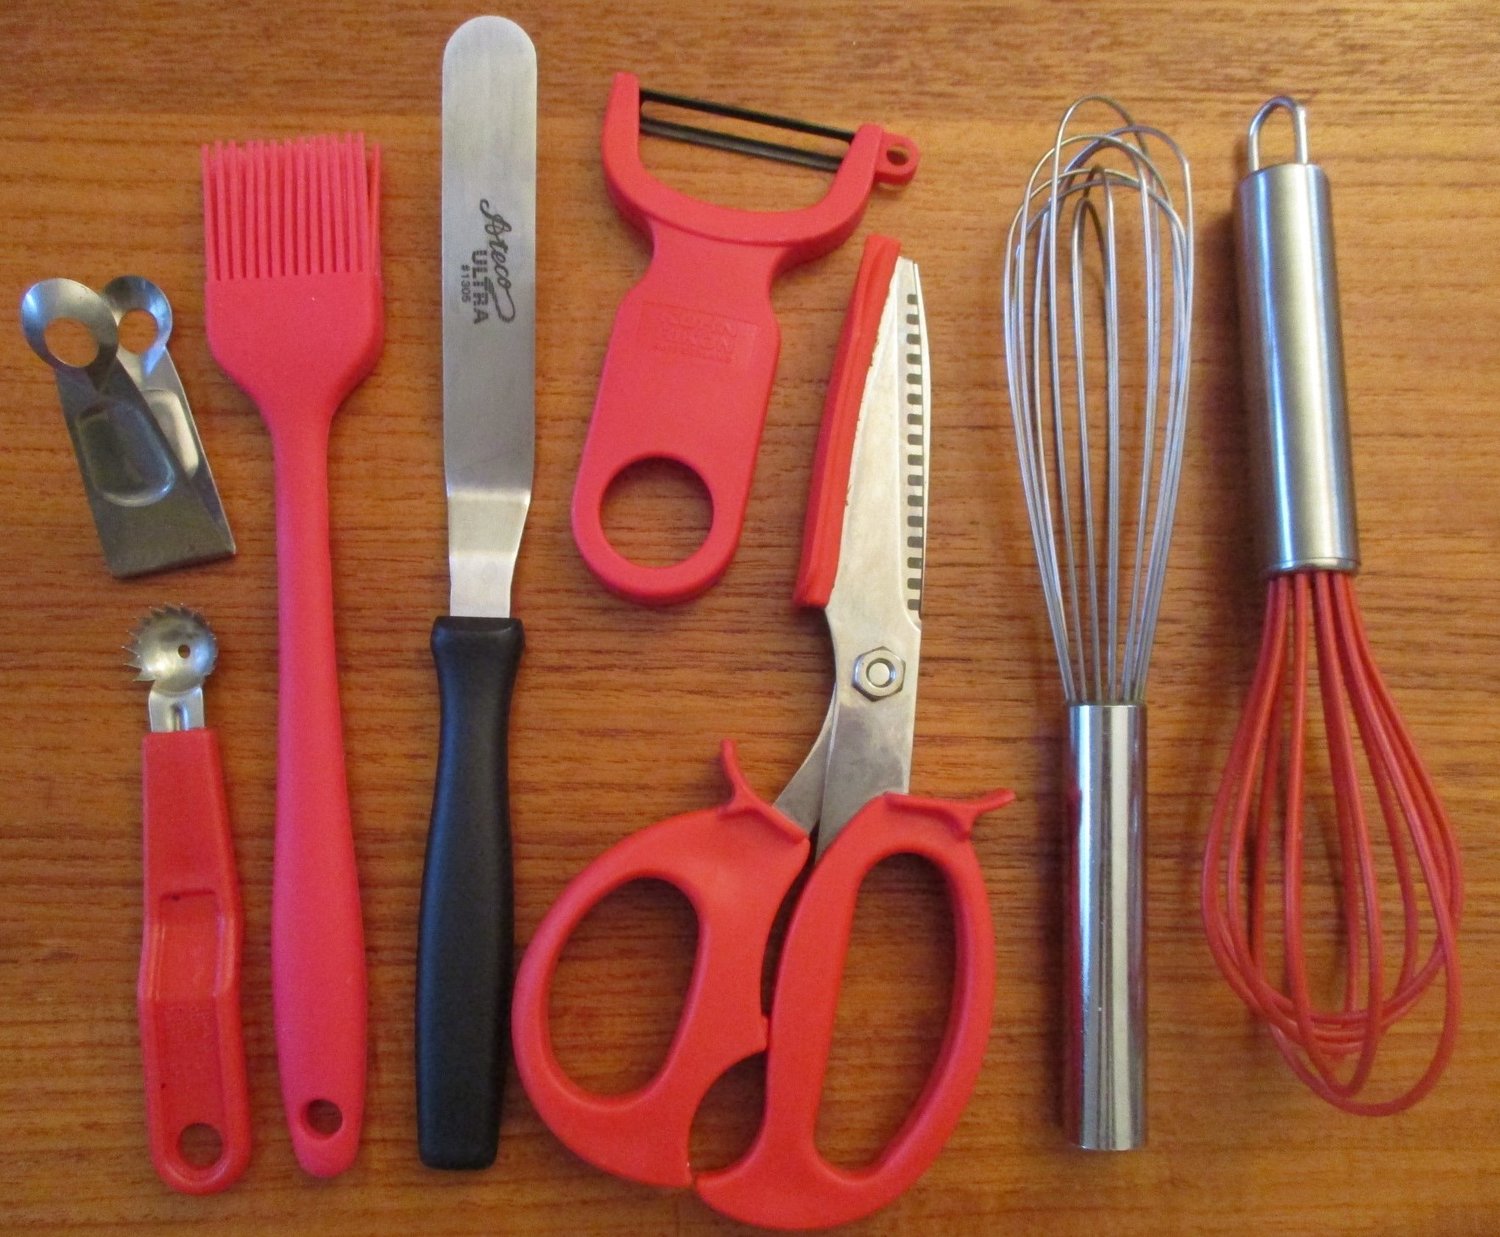 TRR photos by Jude Waterson
Pictured are a strawberry huller, tiny serrated spoon, basting brush, off-set spatular, veggie peeler, kitchen shears, and whisks.